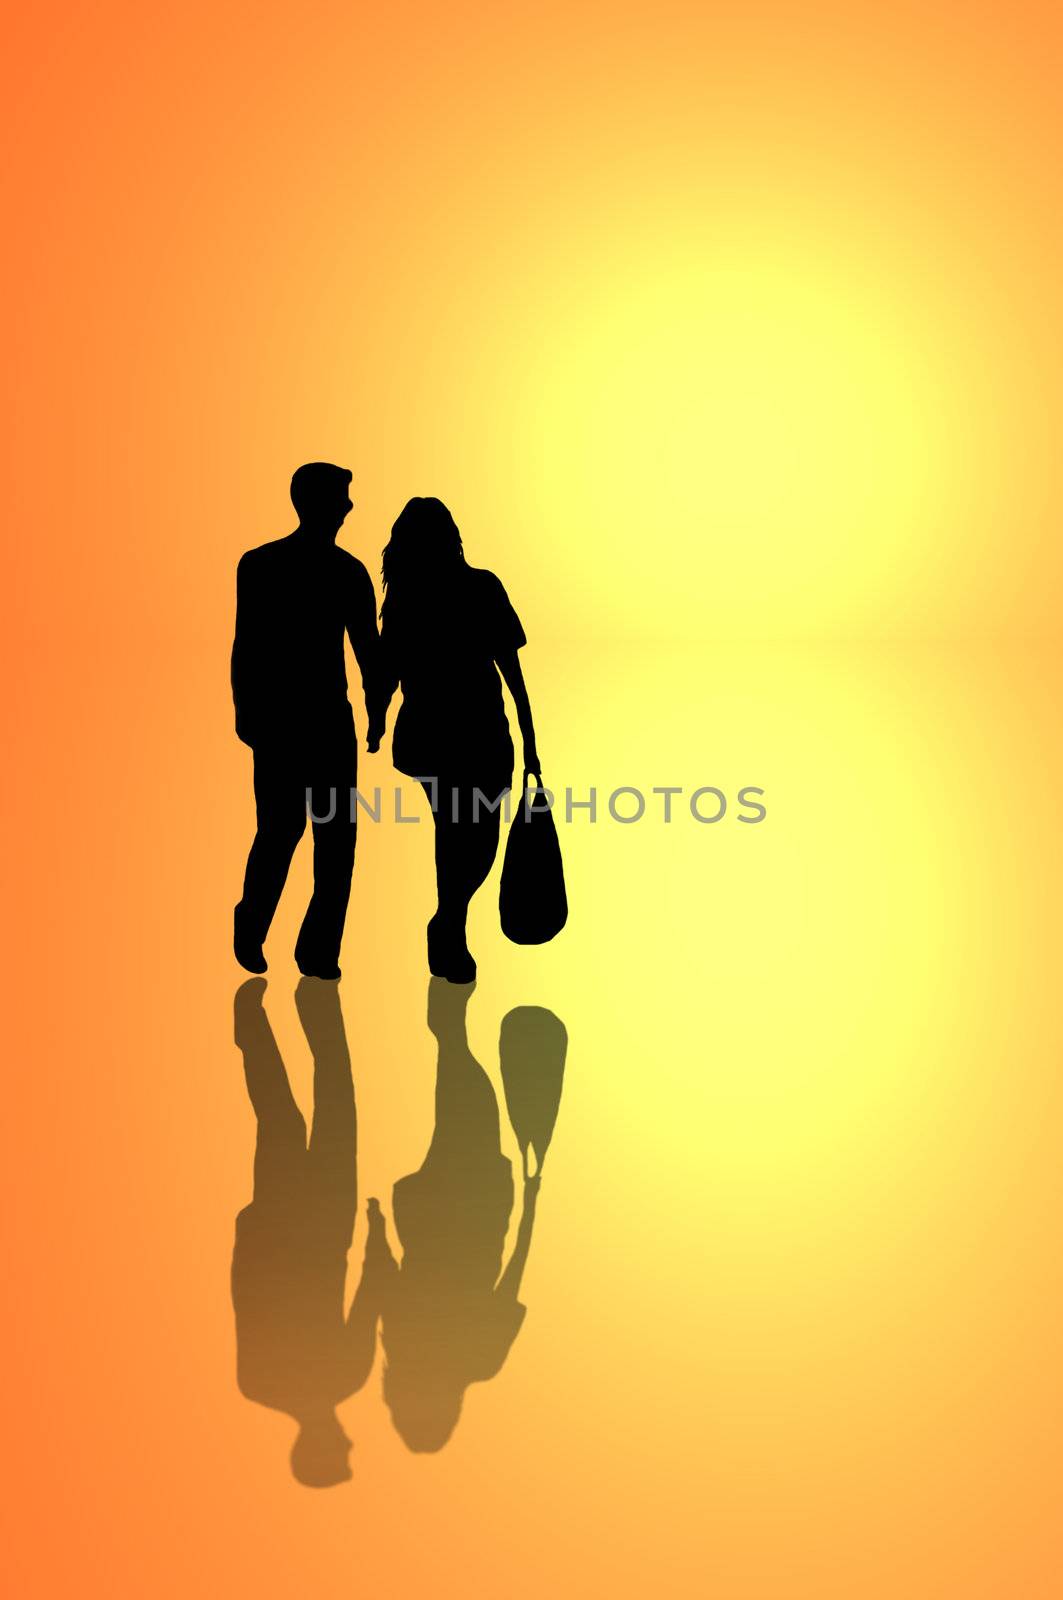 A silhouetted young couple walking on reflective surface towards a bright yellow light with warm orange background.